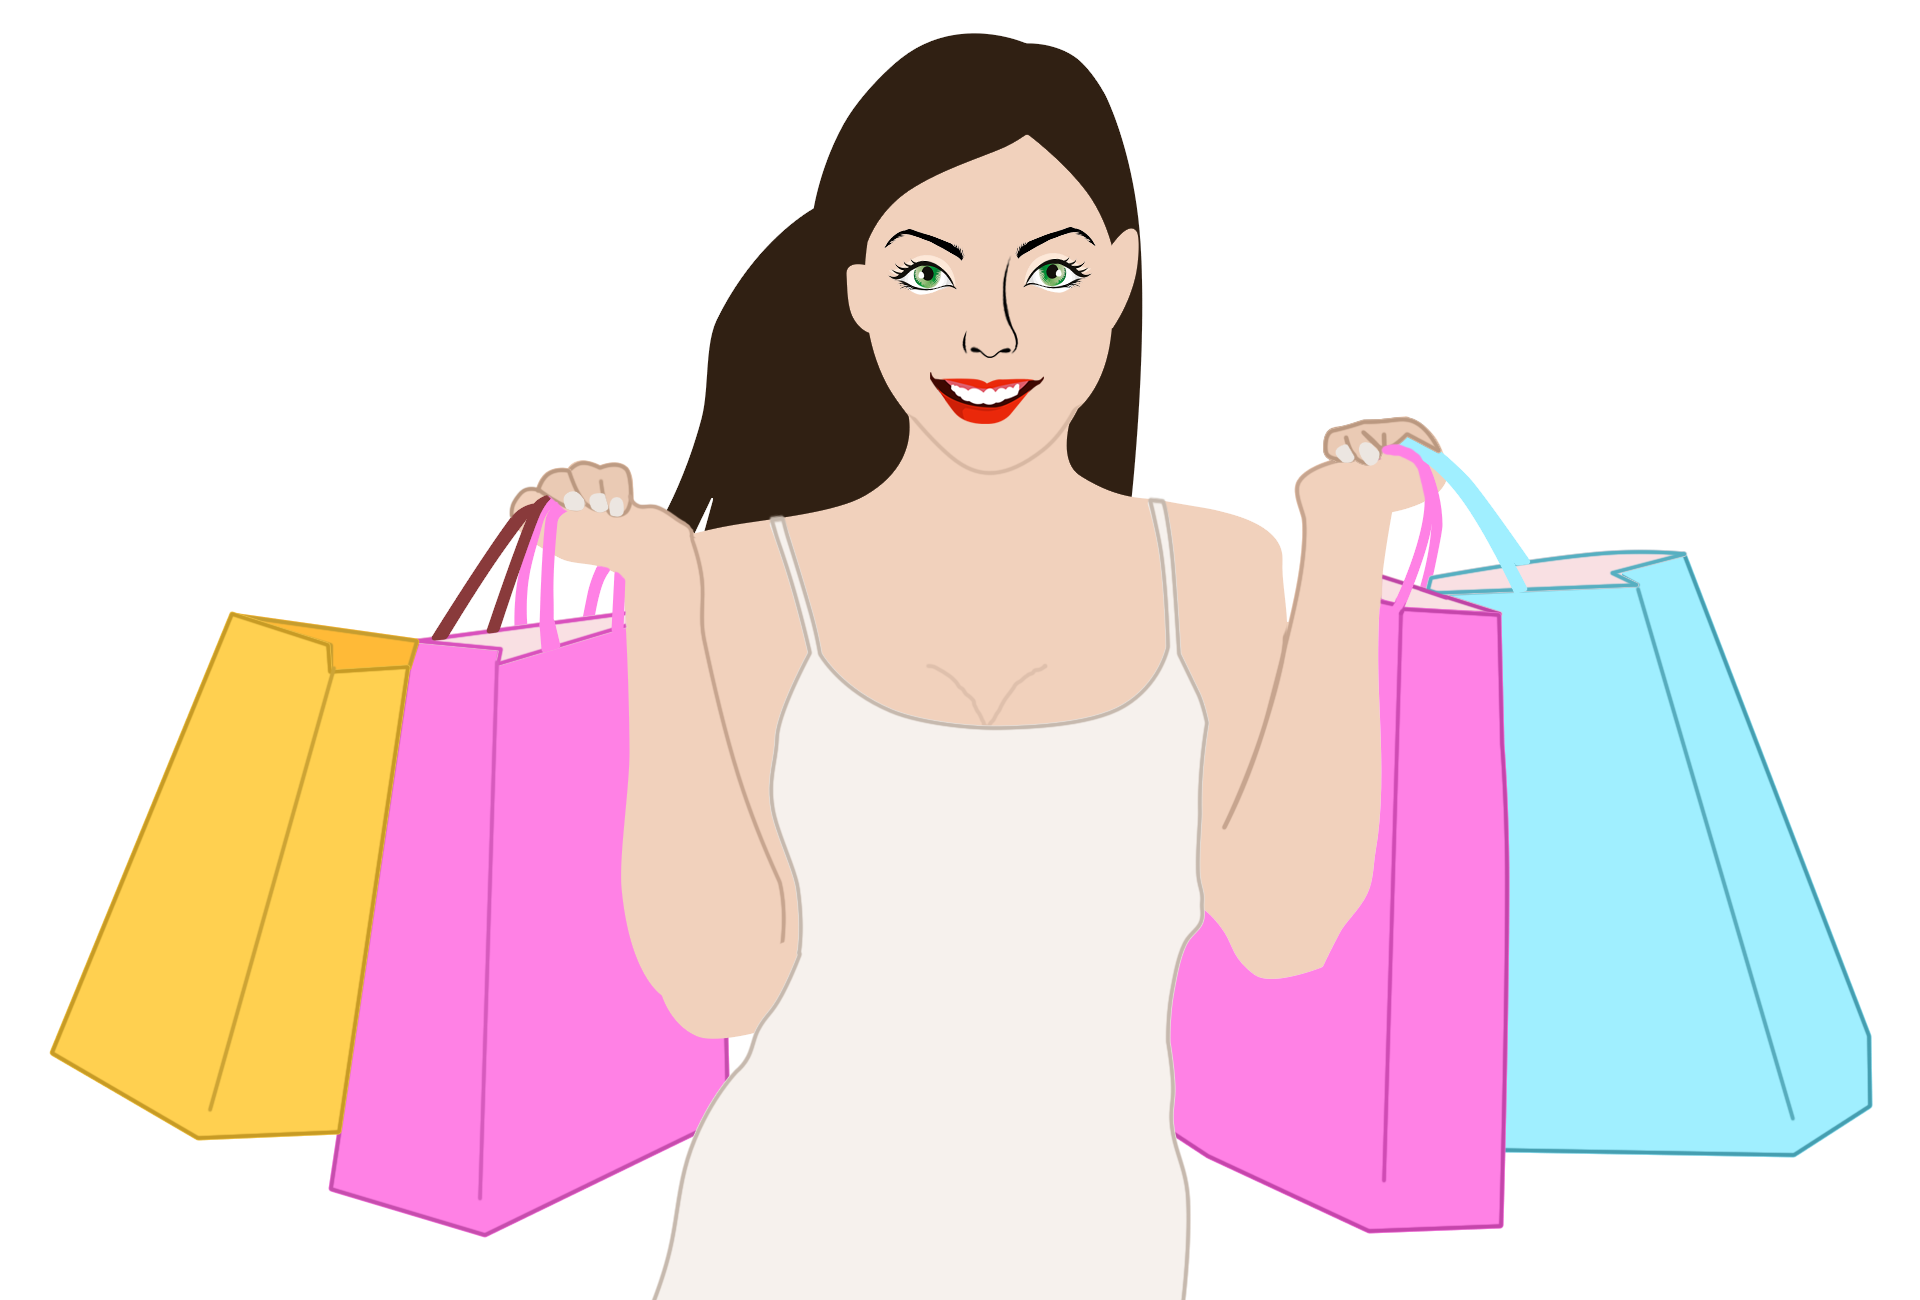 Save Money With Deals, Coupons, and Freebies